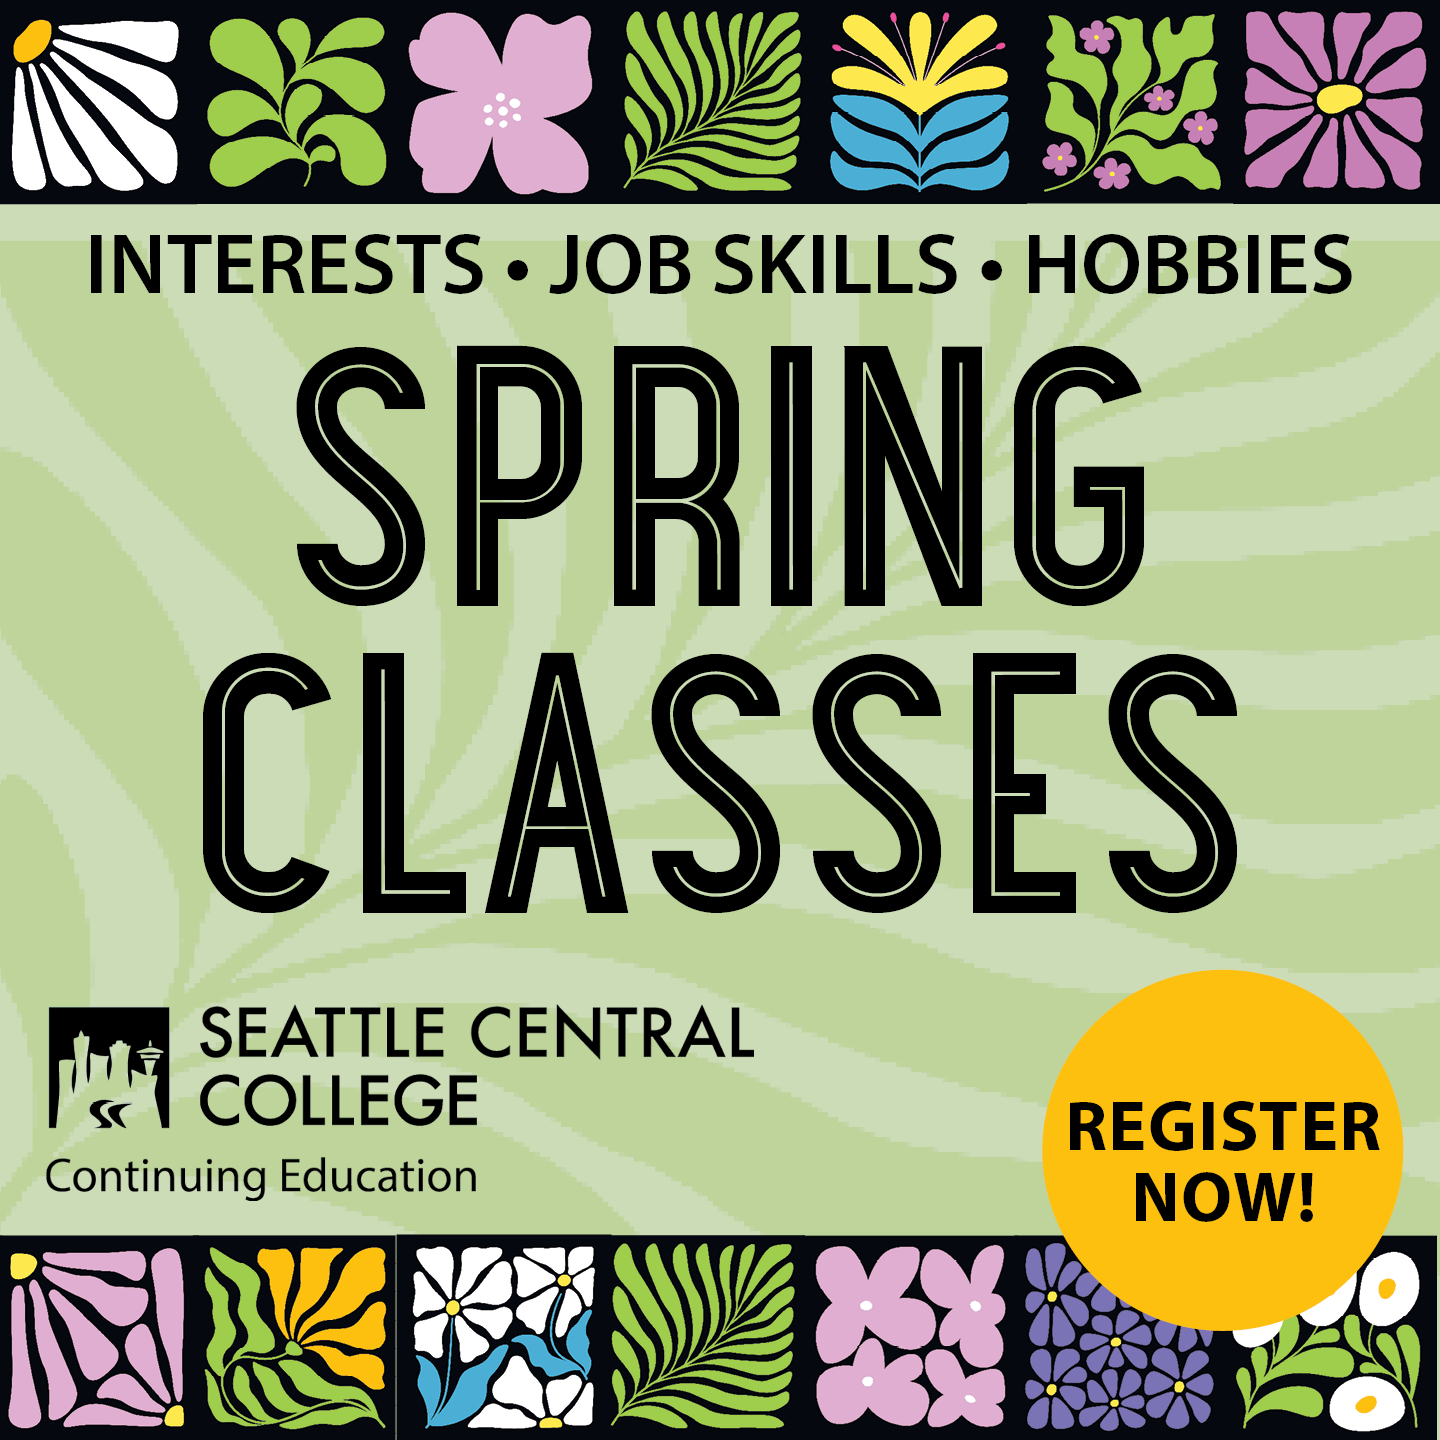 Spring Classes - Interests, Job Skills, Hobbies - top and bottom border of blocky flower images with bright colors